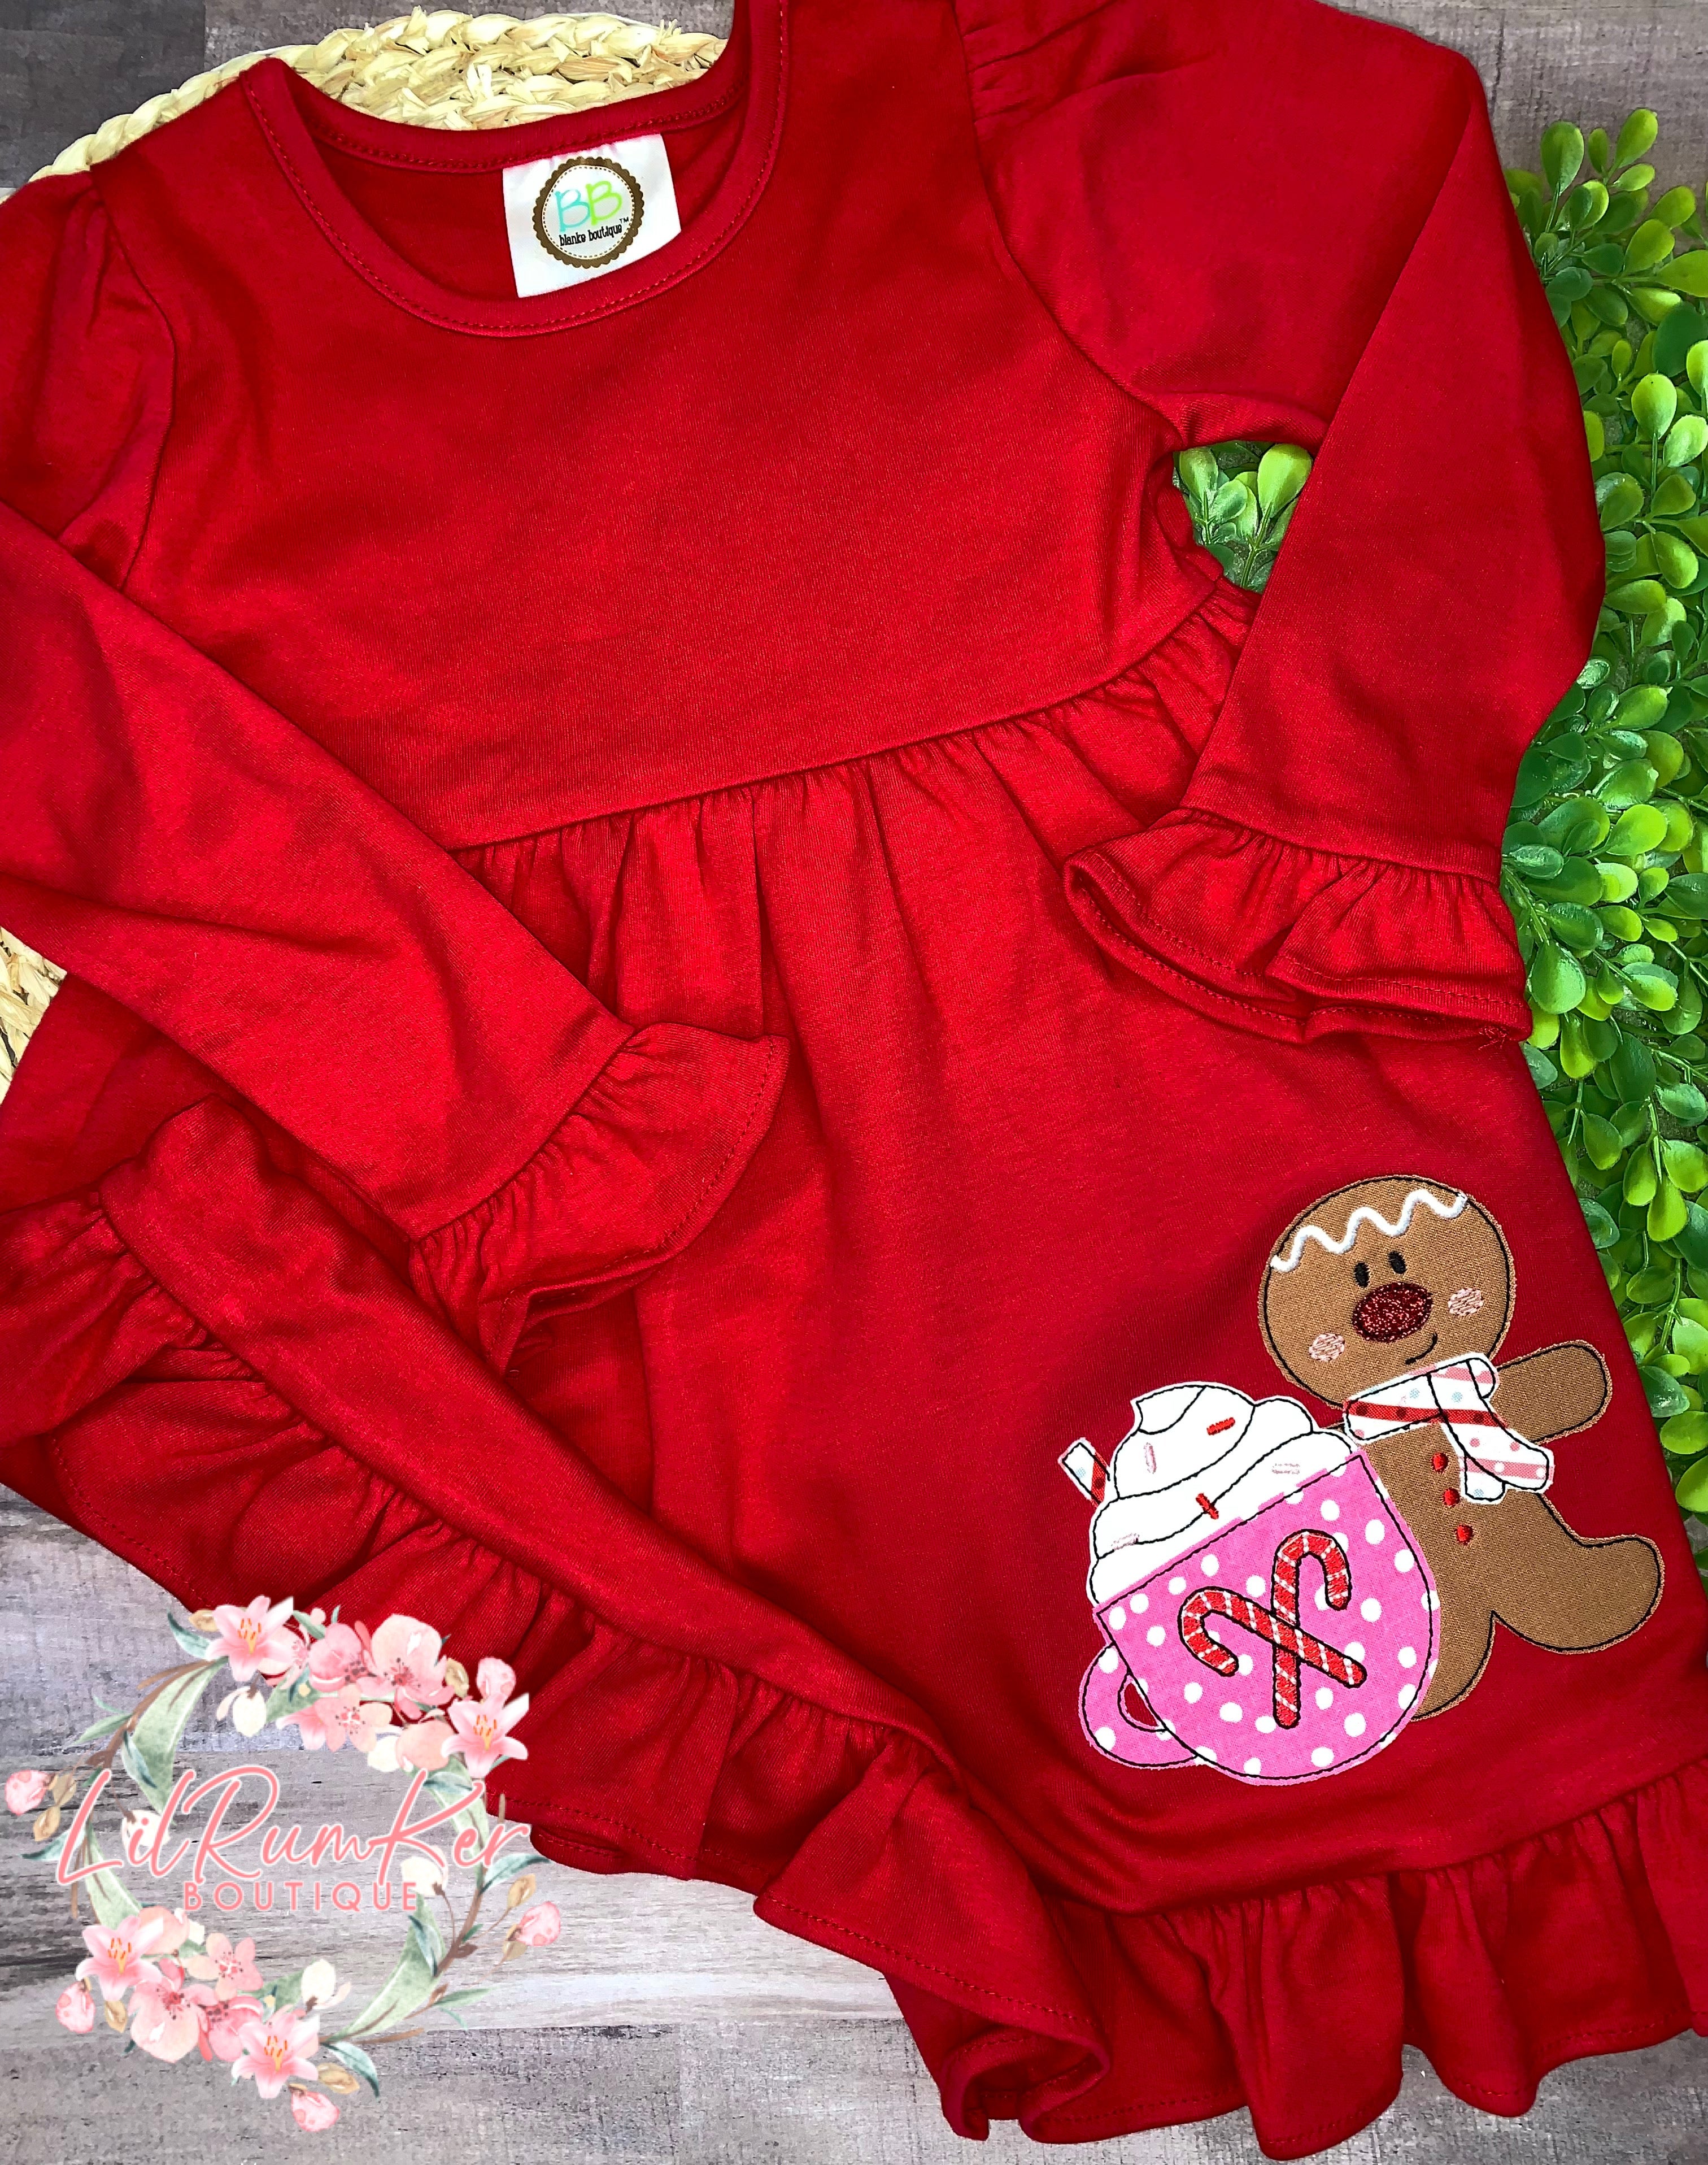 Gingerbread man hot cocoa dress (can be personalized)